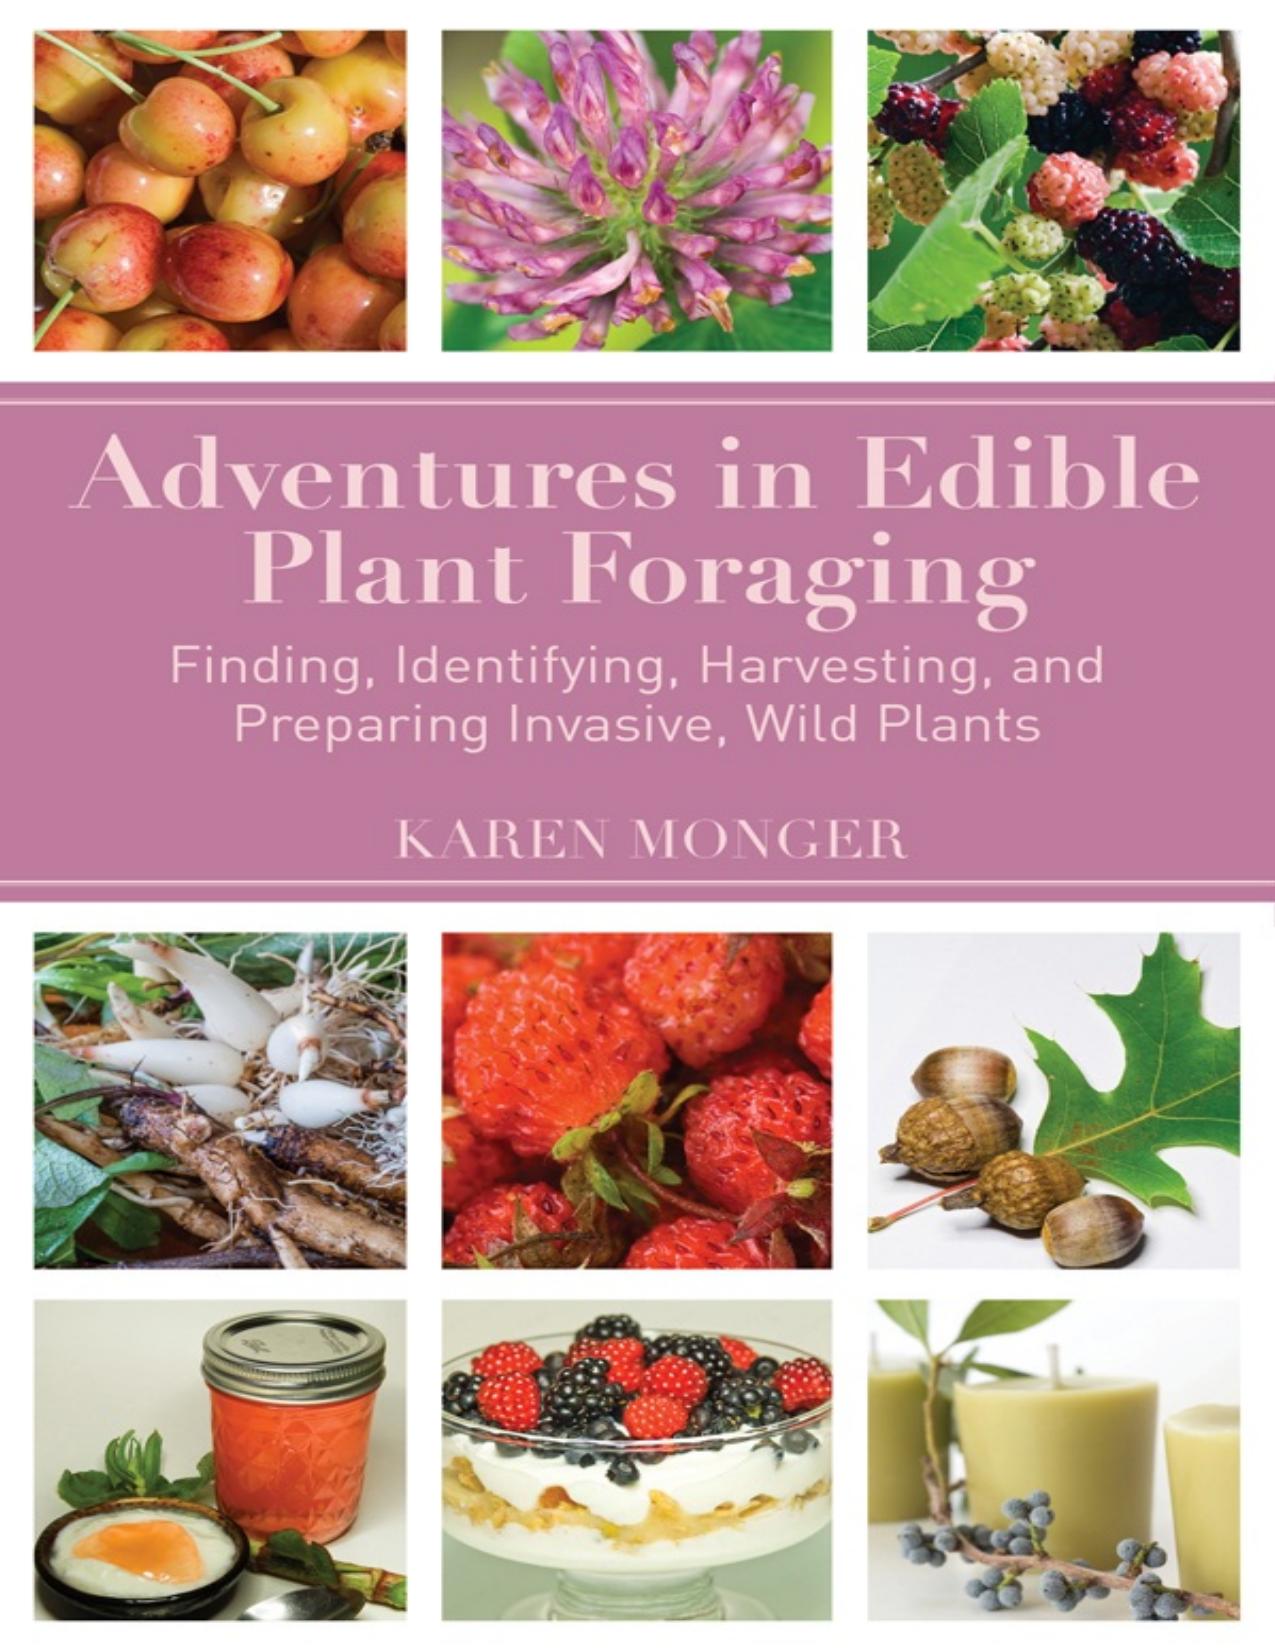 Adventures in Edible Plant Foraging: Finding, Identifying, Harvesting, and Preparing Native and Invasive Wild Plants - PDFDrive.com